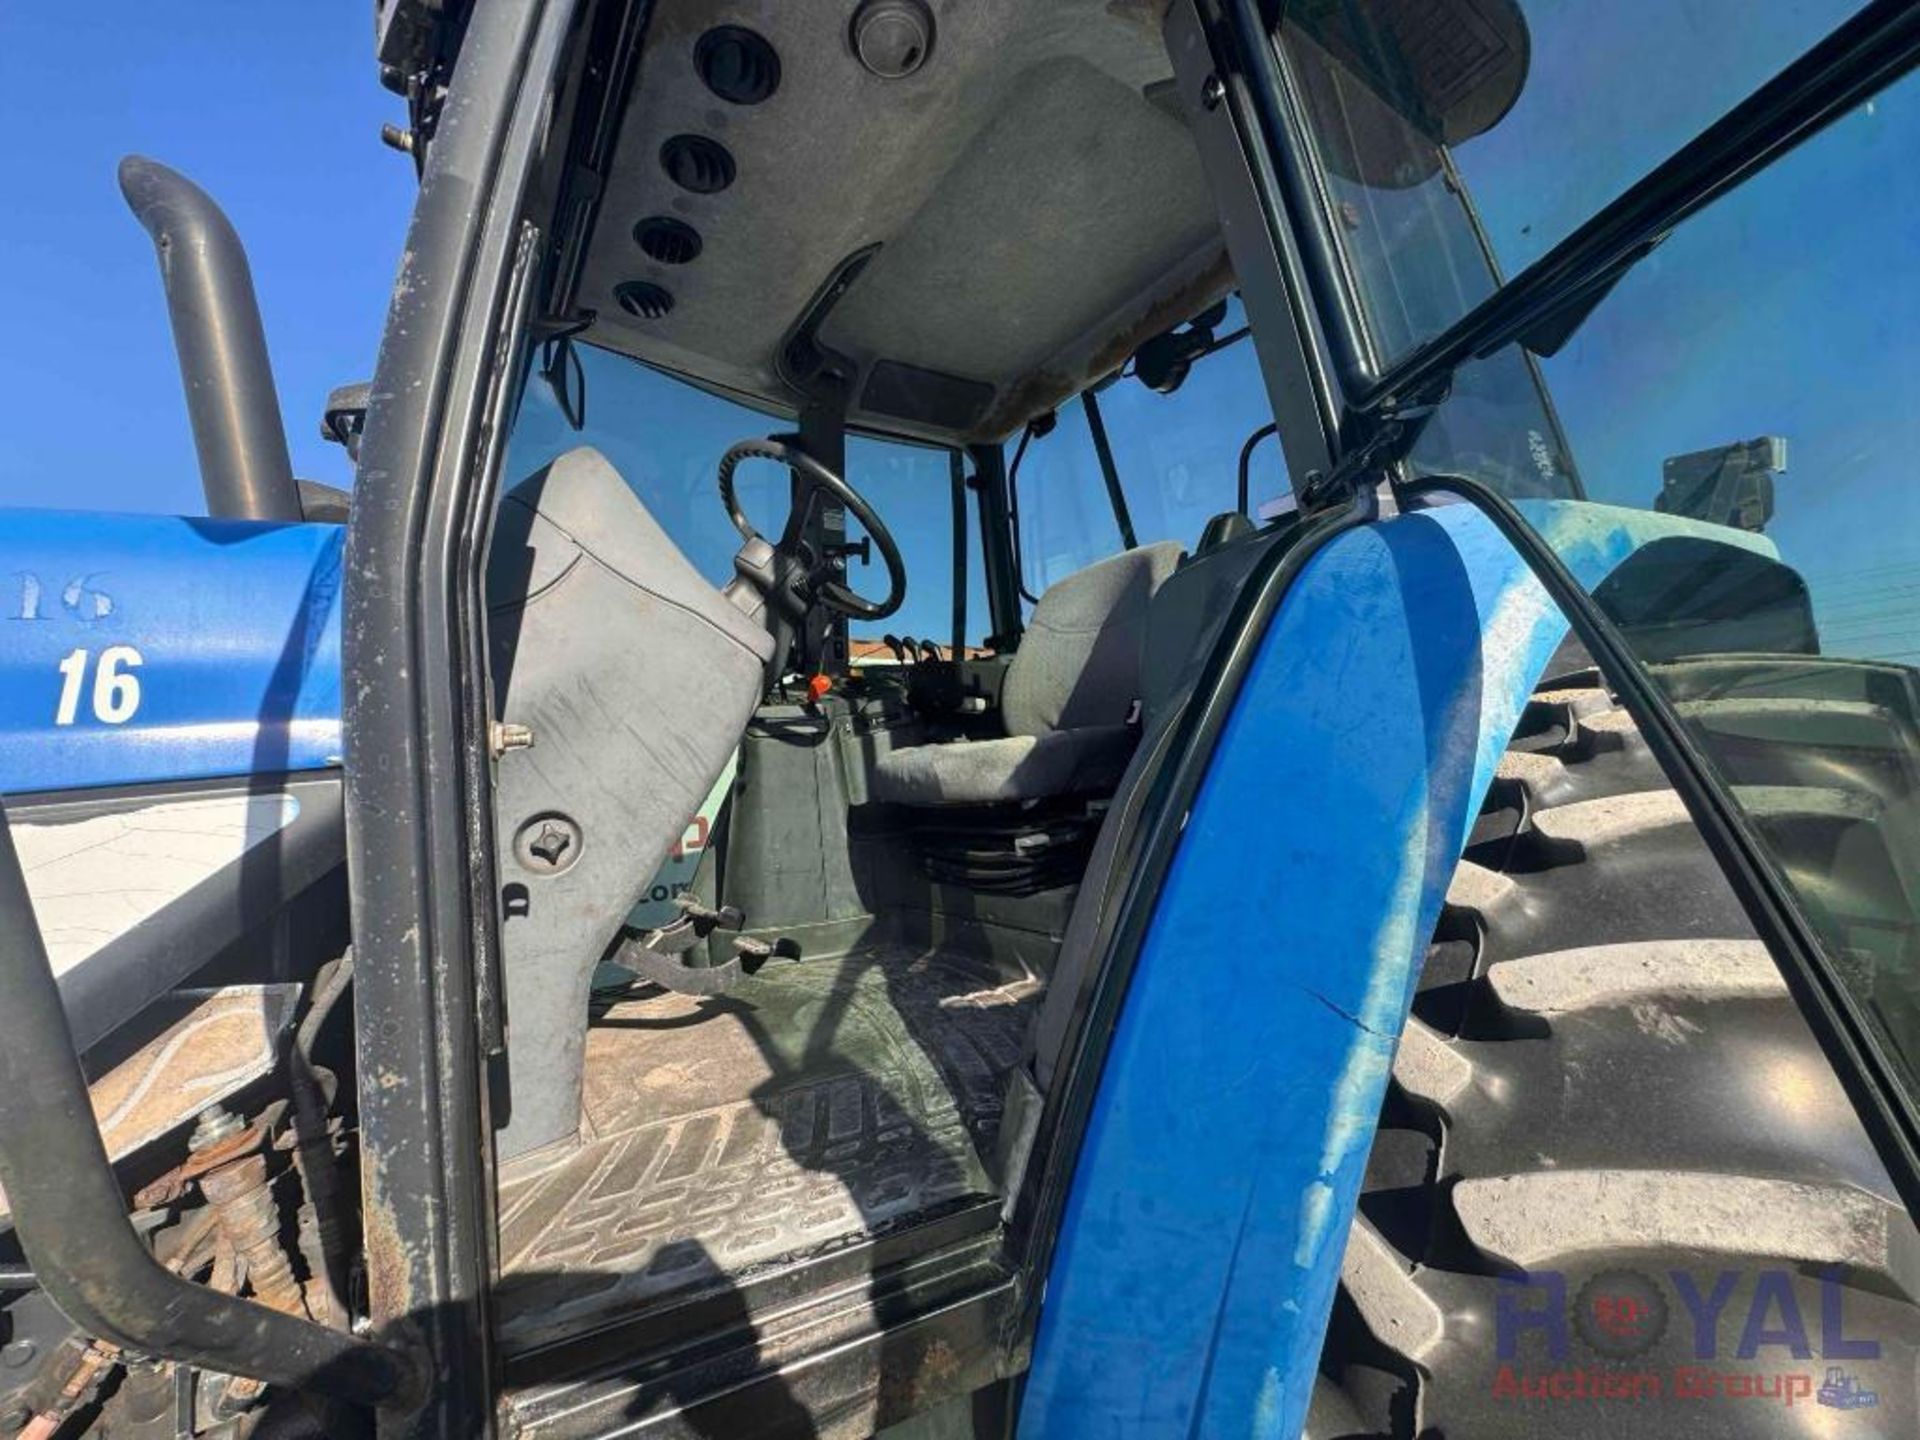 2008 New Holland TM130 4WD Agricultural Tractor - Image 10 of 22